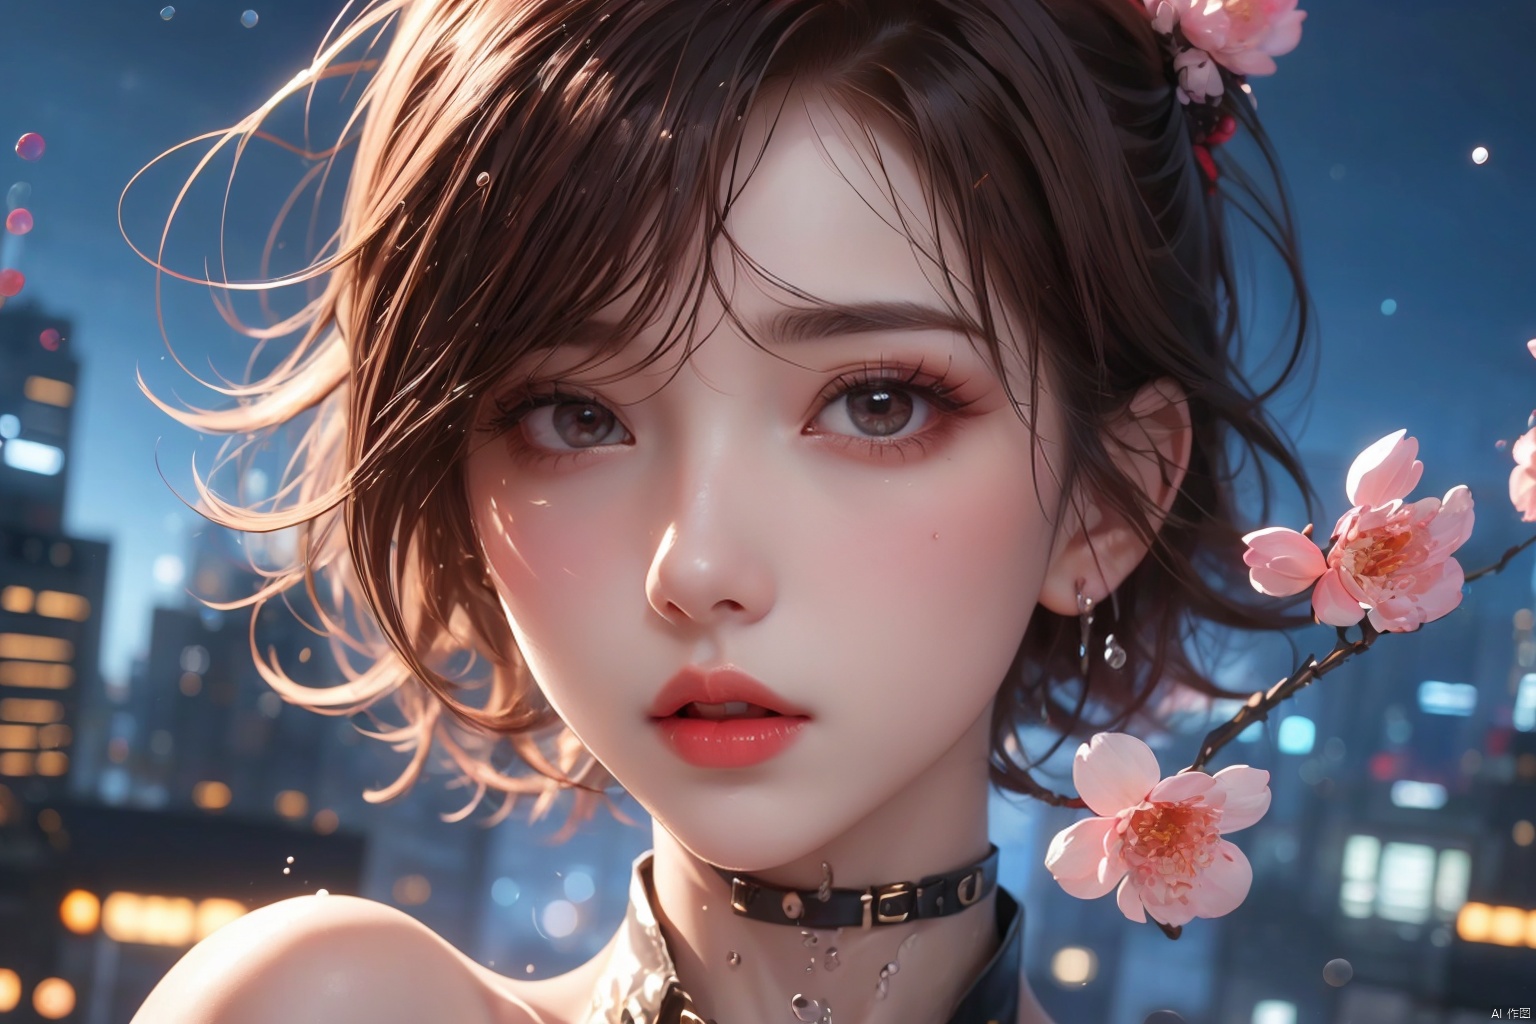  KK-Comic Style,looking at viewer,bangs,lips,makeup,on bed,red lips,peach blossom eye,pink hair,crop_top,skirt,night_sky,rooftop,city,neon lights,highly detailed,ultra-high resolutions,32K UHD,best quality,masterpiece,

1girl\((bishoujo), (lovely face:1.6), (reddish black hair:1.6), (browneyes:1.6), (small breast:1.8), (straight_hair:1.4), (short_hair:1.4), plump_*****, (hairless:1.2), long_legs, sharp_eyelid, black eyeliner, black eyelashes, reddish eyeshadow, (perfect detailed face), (pink lipgloss:1.3), (perfect hands)\),
(cry:1.4), (grimace:1.4),(full_body:1.2),(topless_(female):1.4), topless, 
water drop,water, partiallysubmerged,flower,airbubble